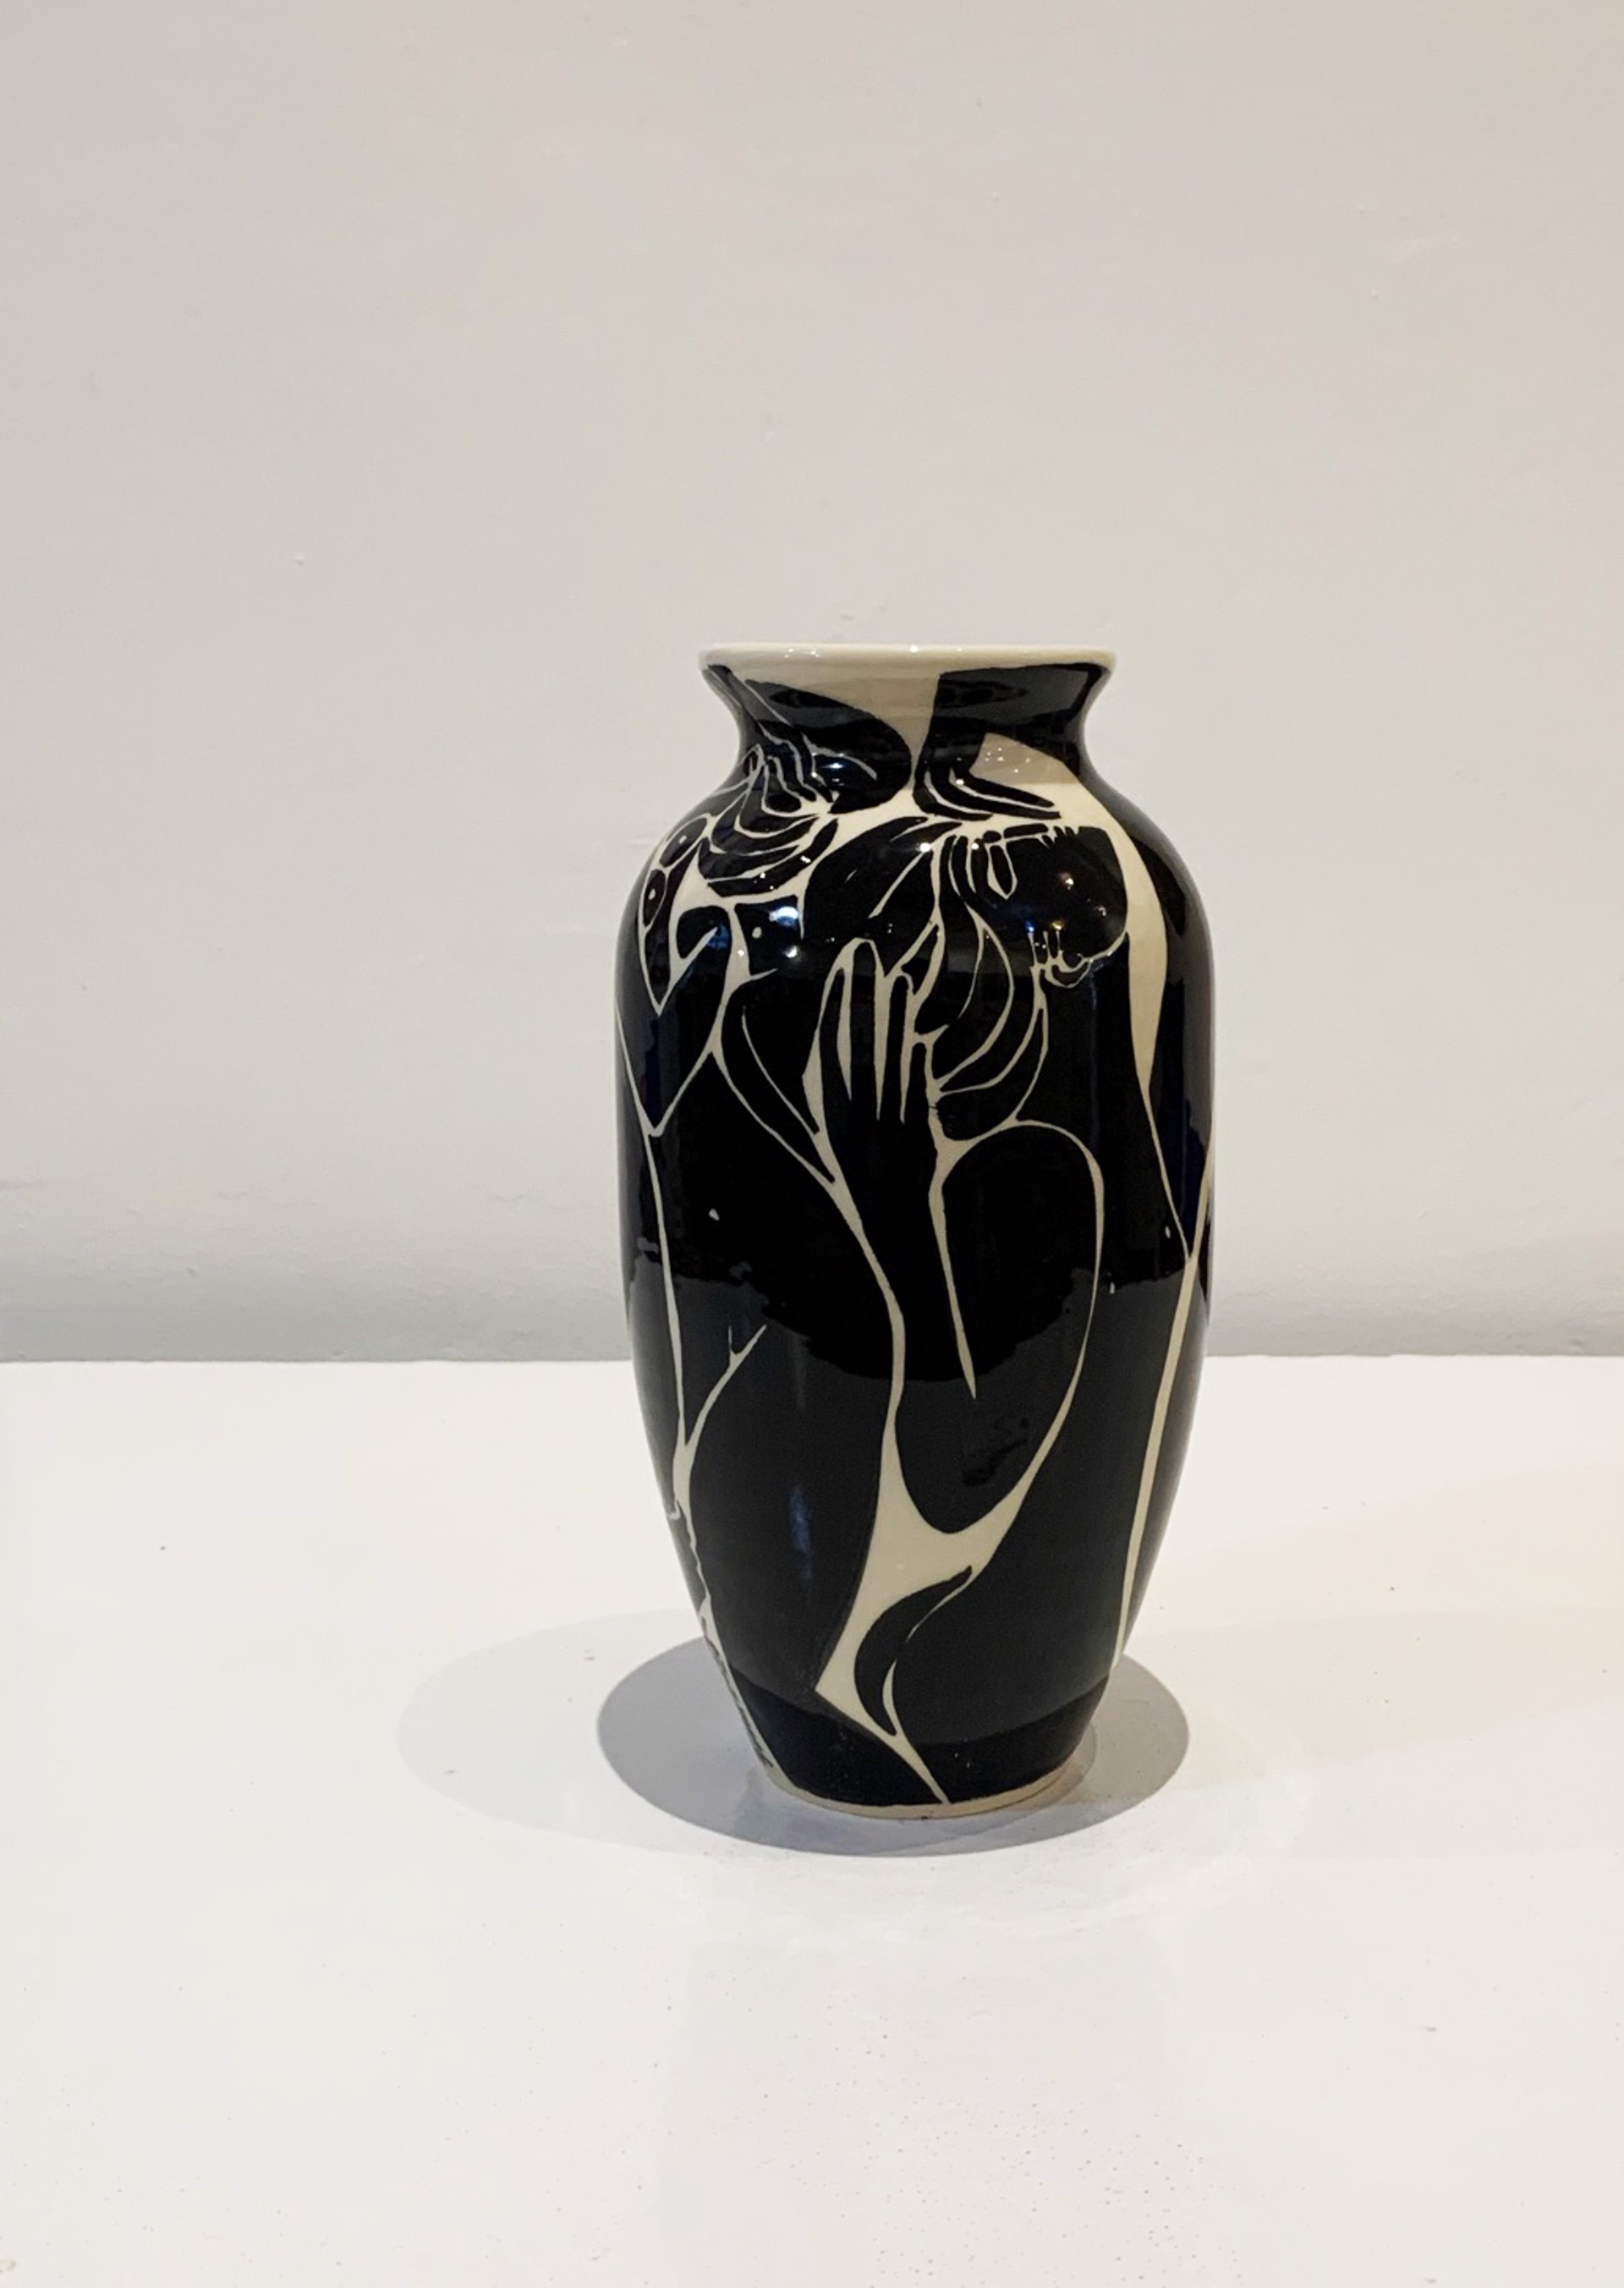 Shadow Figures Vase #8 by Ken and Tina Riesterer